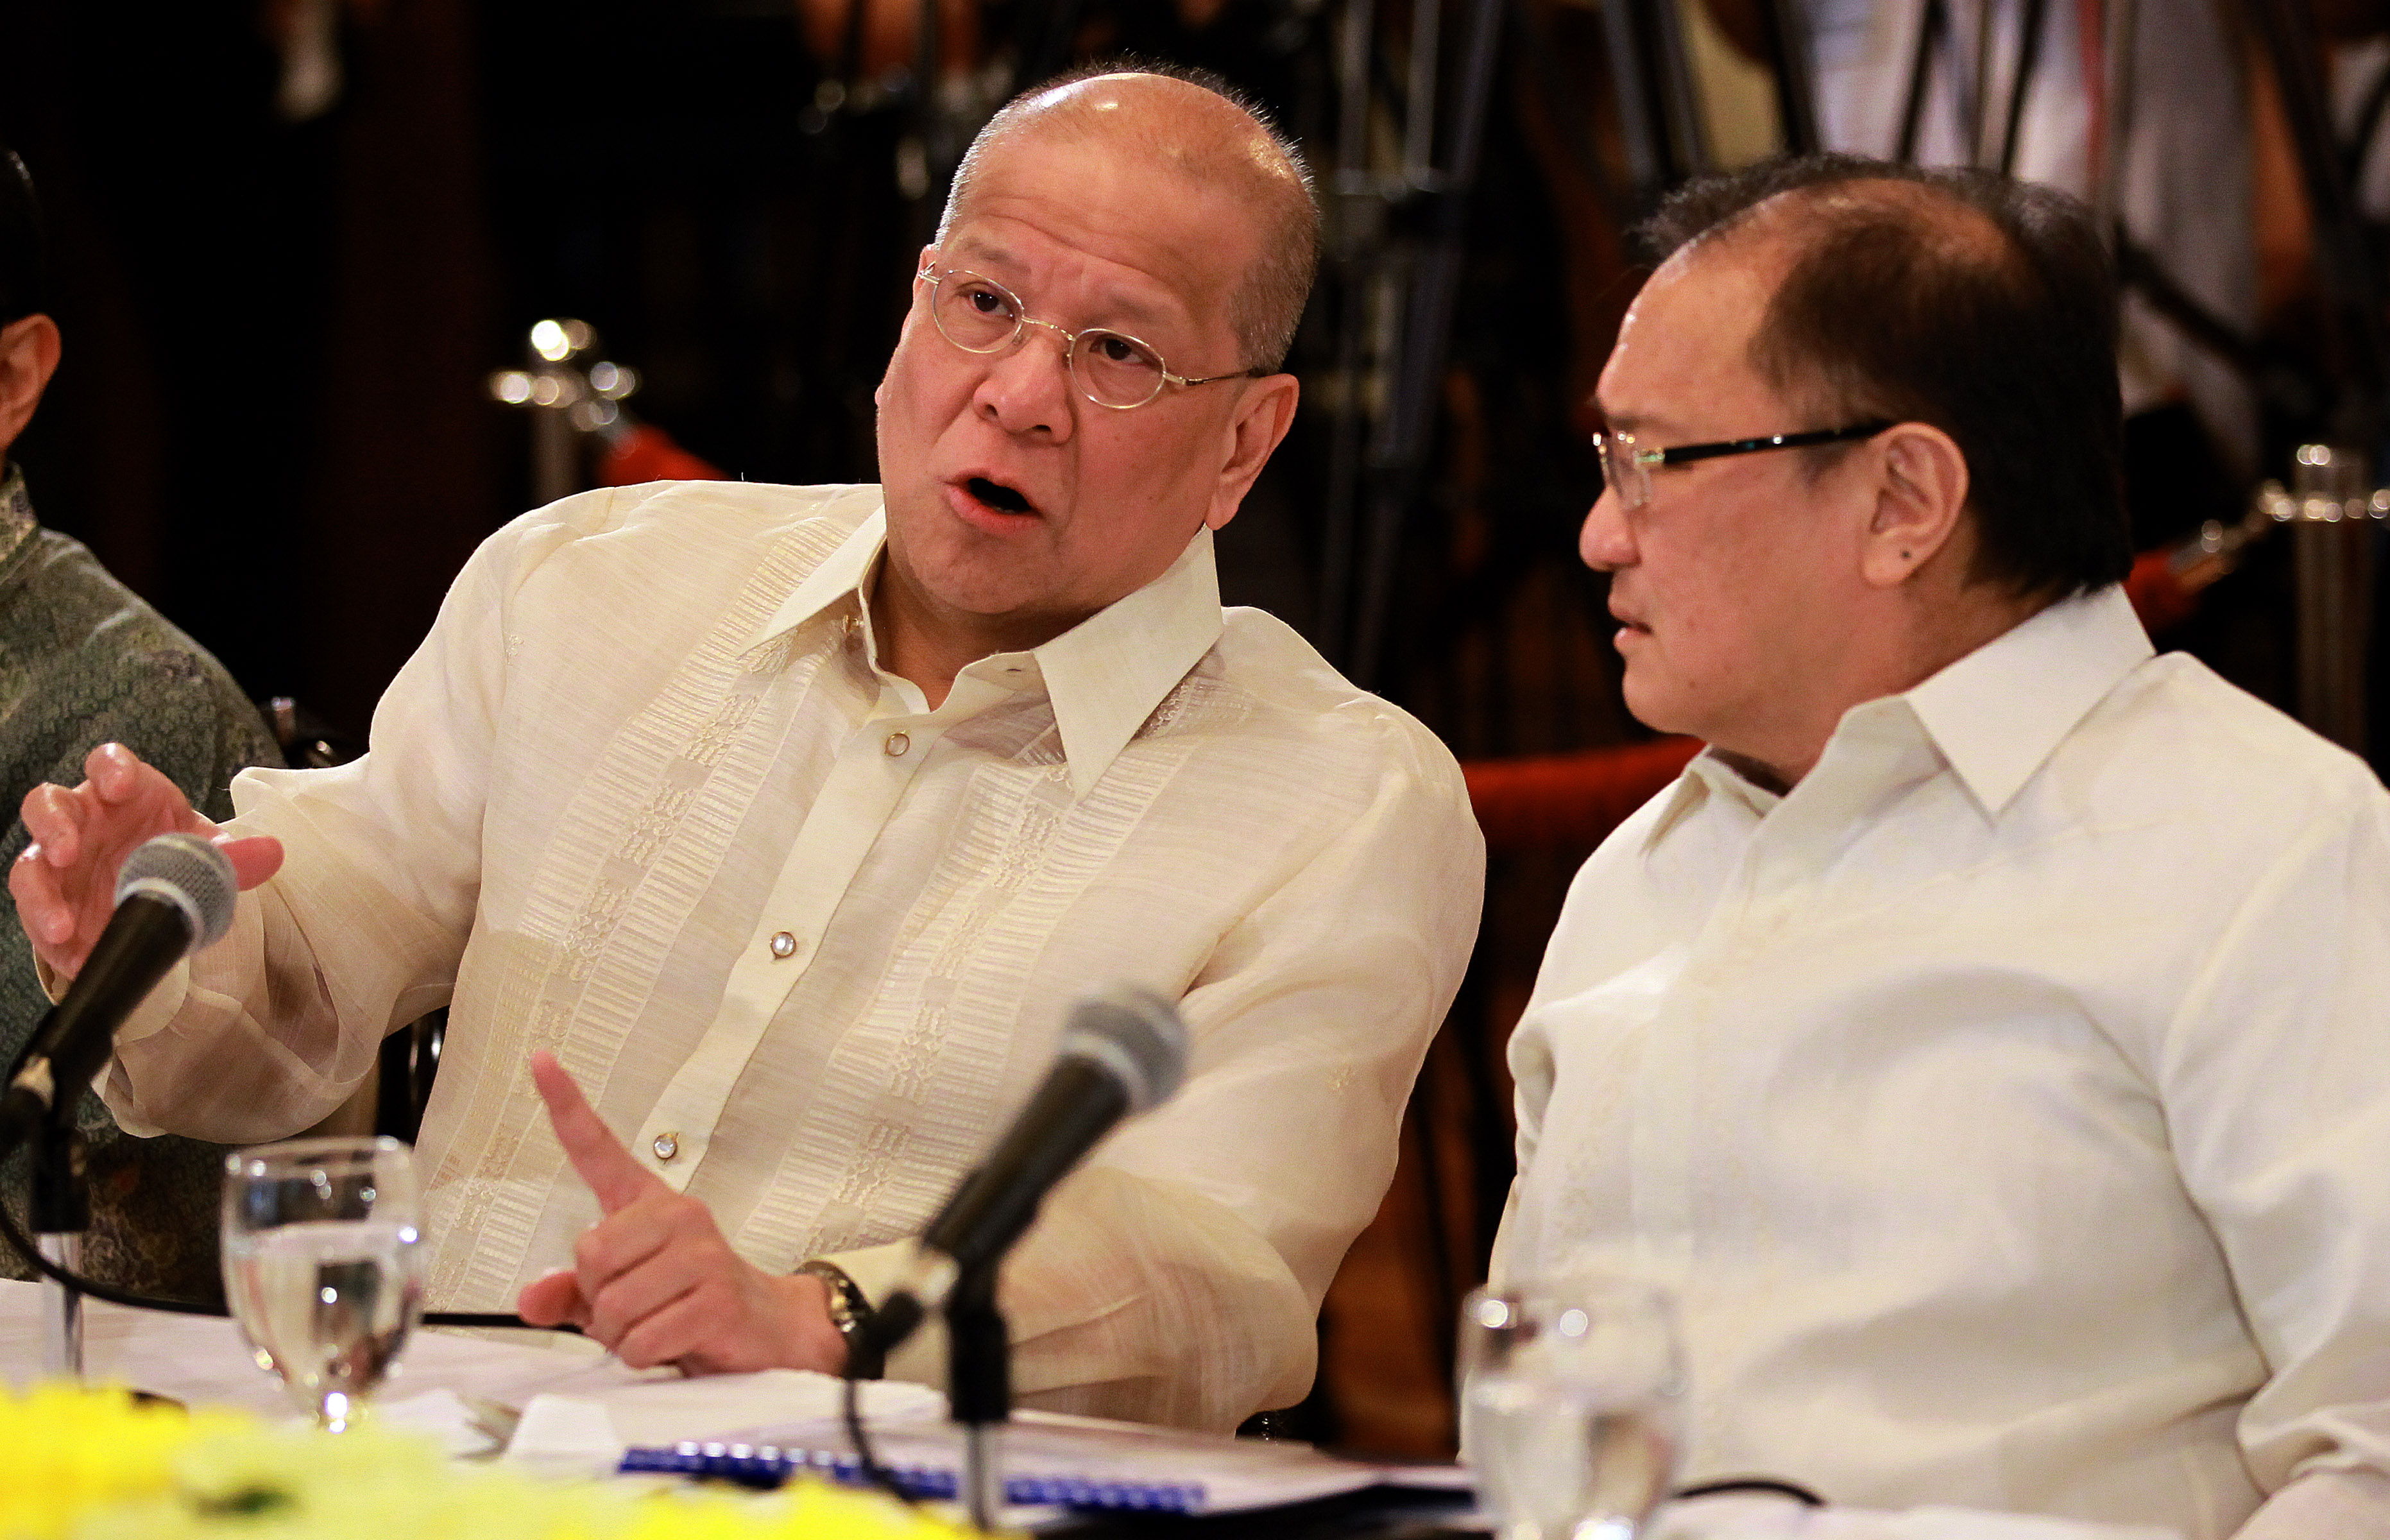 BUSINESS RIVALS. San Miguel president Ramon Ang and Metro Pacific Investments Chair Manuel Pangilinan exchange views on the NLEx-SLEx connector roads they proposed to the government in a presentation at Malacanang. Photo taken by Malacanang Photo Bureau